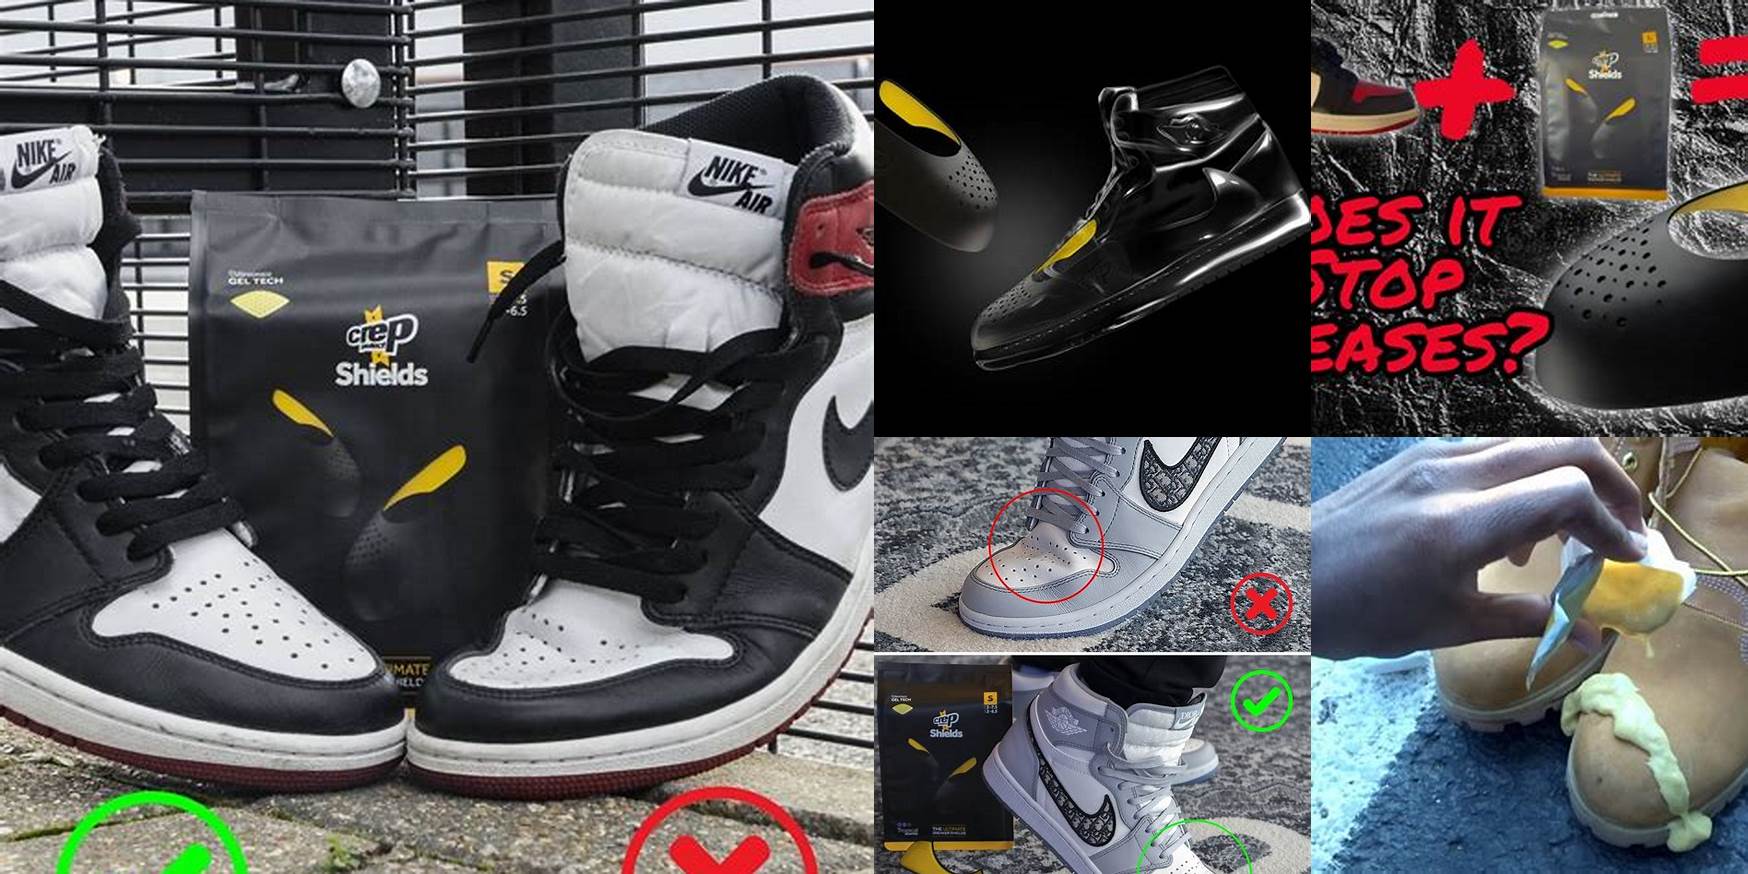 How To Put Crep Shields In Shoes